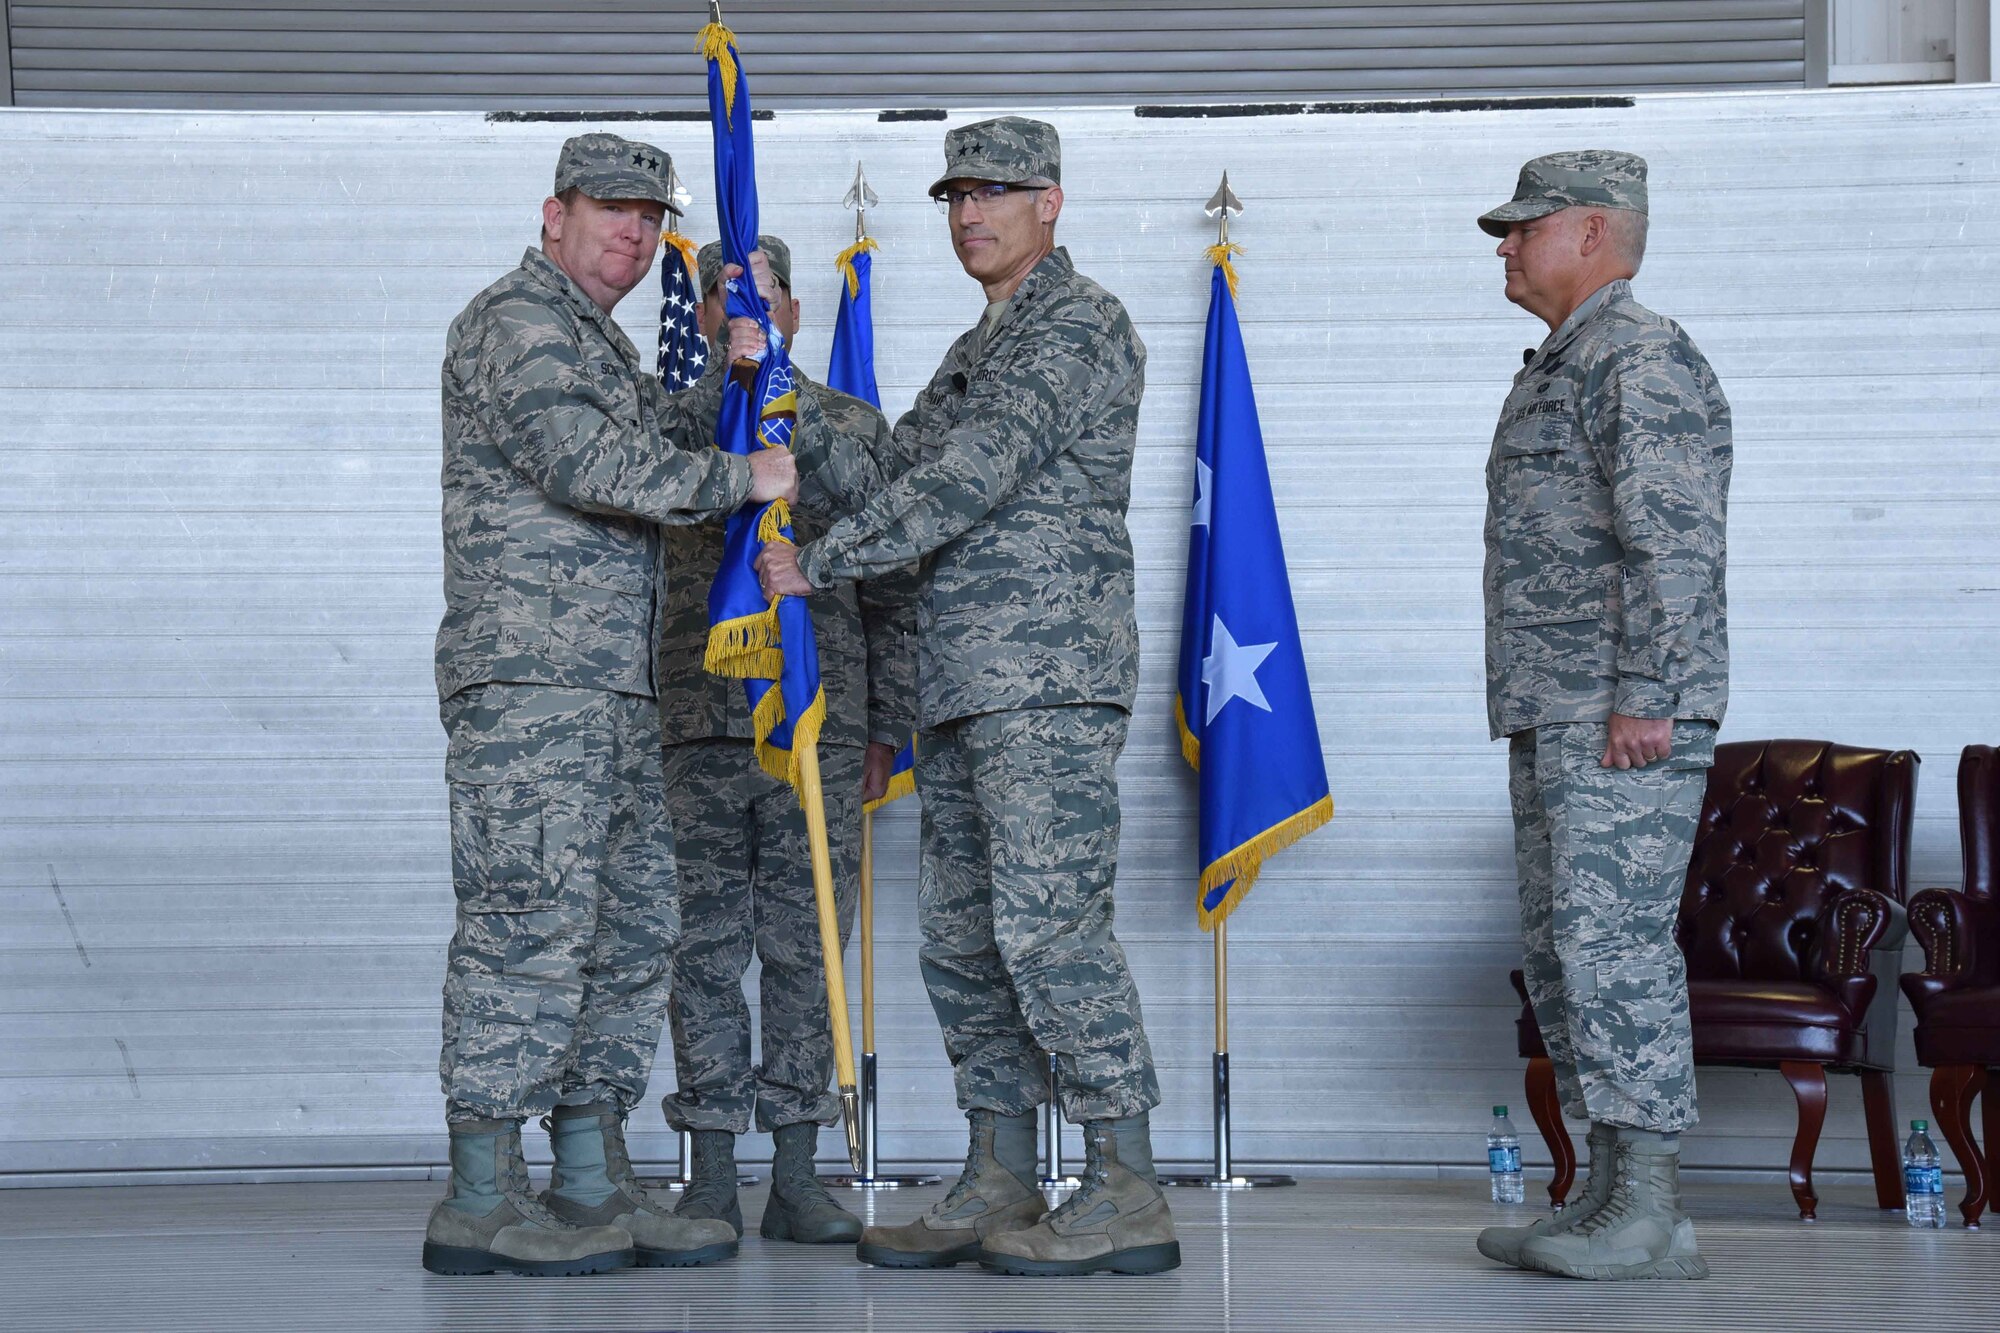 Maj. Gen. Craig L. La Fave (center) took command of 22nd Air Force during a change of command ceremony Nov. 14, 2017, at Keesler Air Force Base, Mississippi. Twenty-second AF is headquartered at Dobbins AFB, Georgia, and the change of command took place during the 22nd AF Senior Leader Summit, which was being hosted by the 403rd Wing at Keesler AFB Nov. 13 through Nov. 16, 2017. (U.S. Air Force photo by Tech. Sgt. Ryan Labadens)